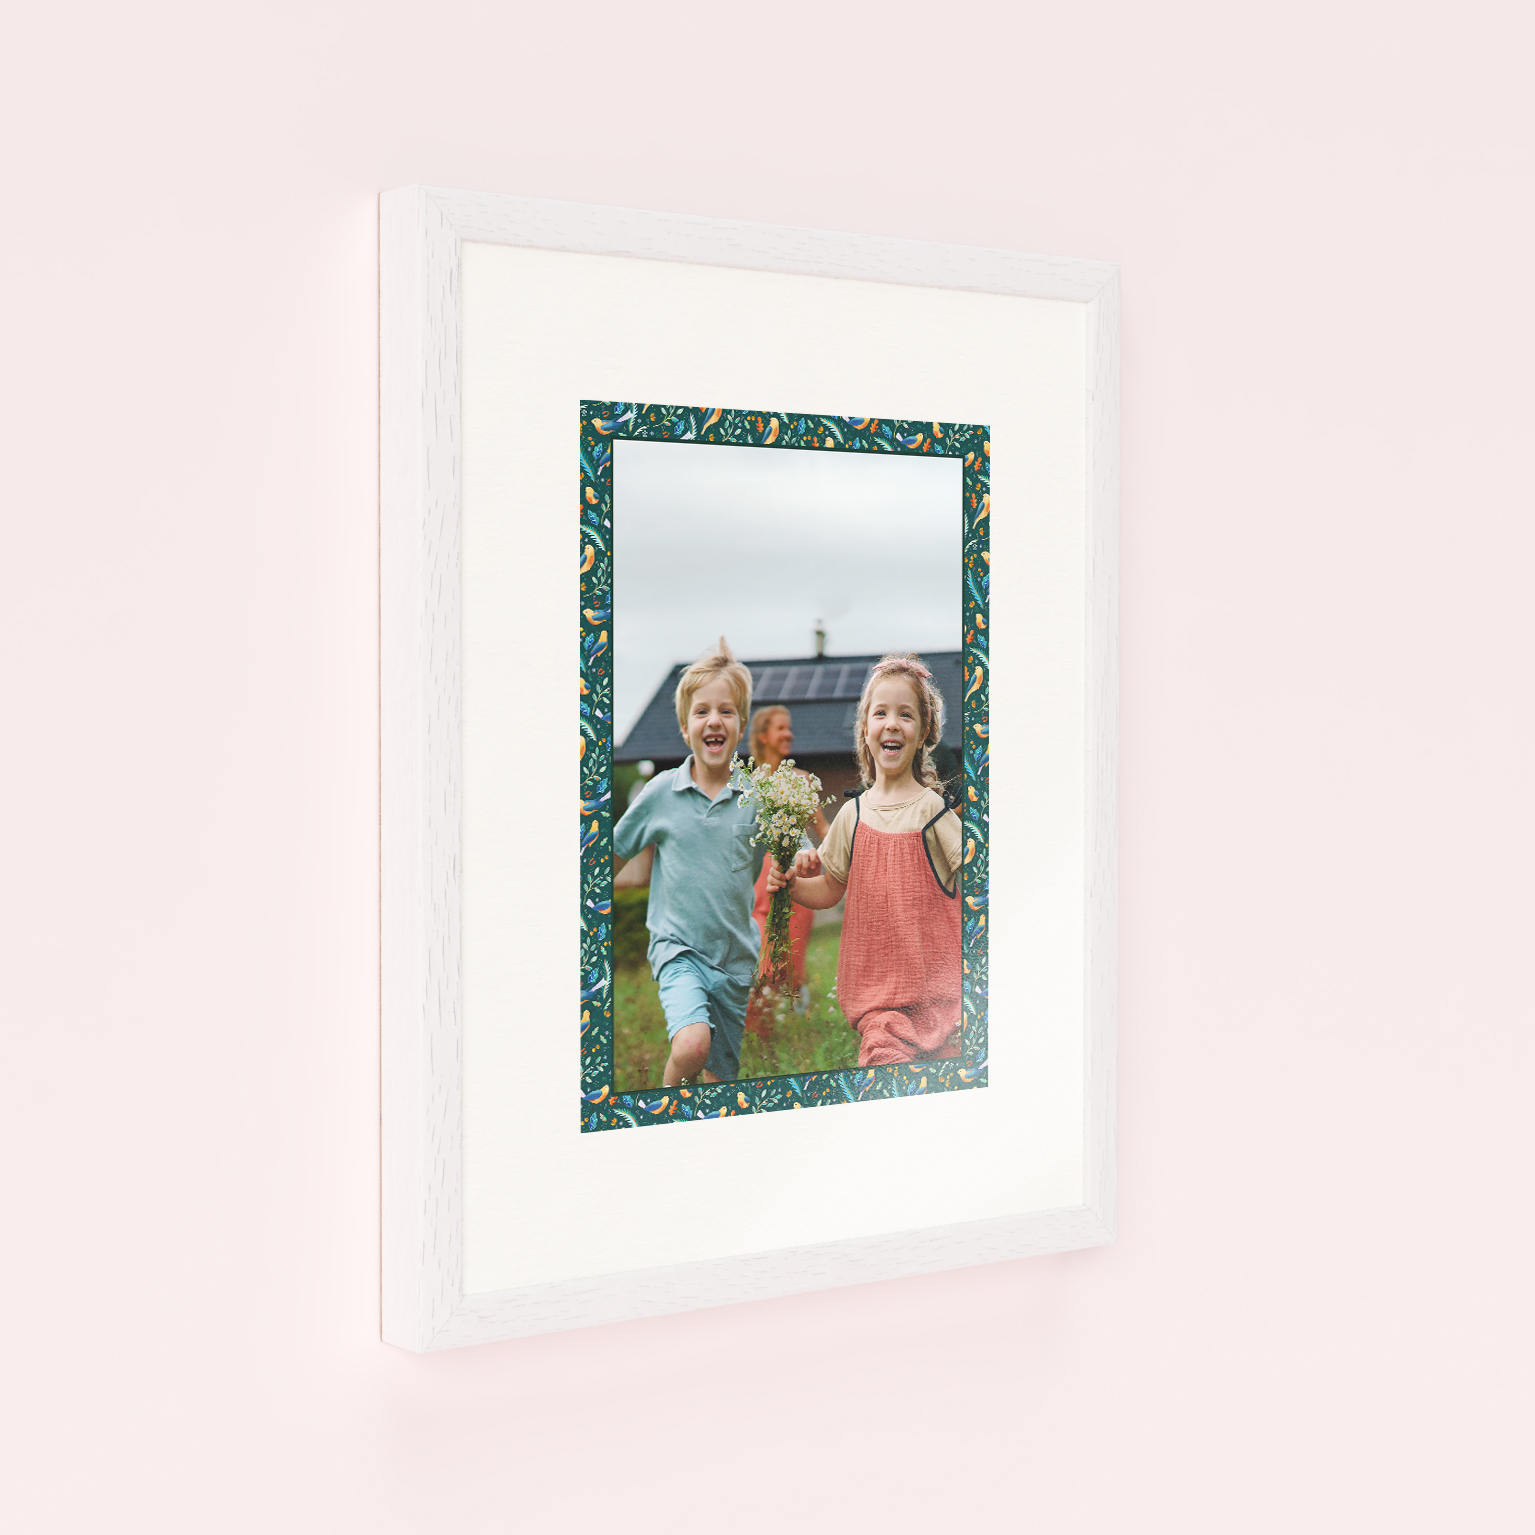 Photo of a framed photo print called 'Heritage Portrait'. It is 40cm x 30cm in size, in a Portrait orientation. It has space for 1 photos.